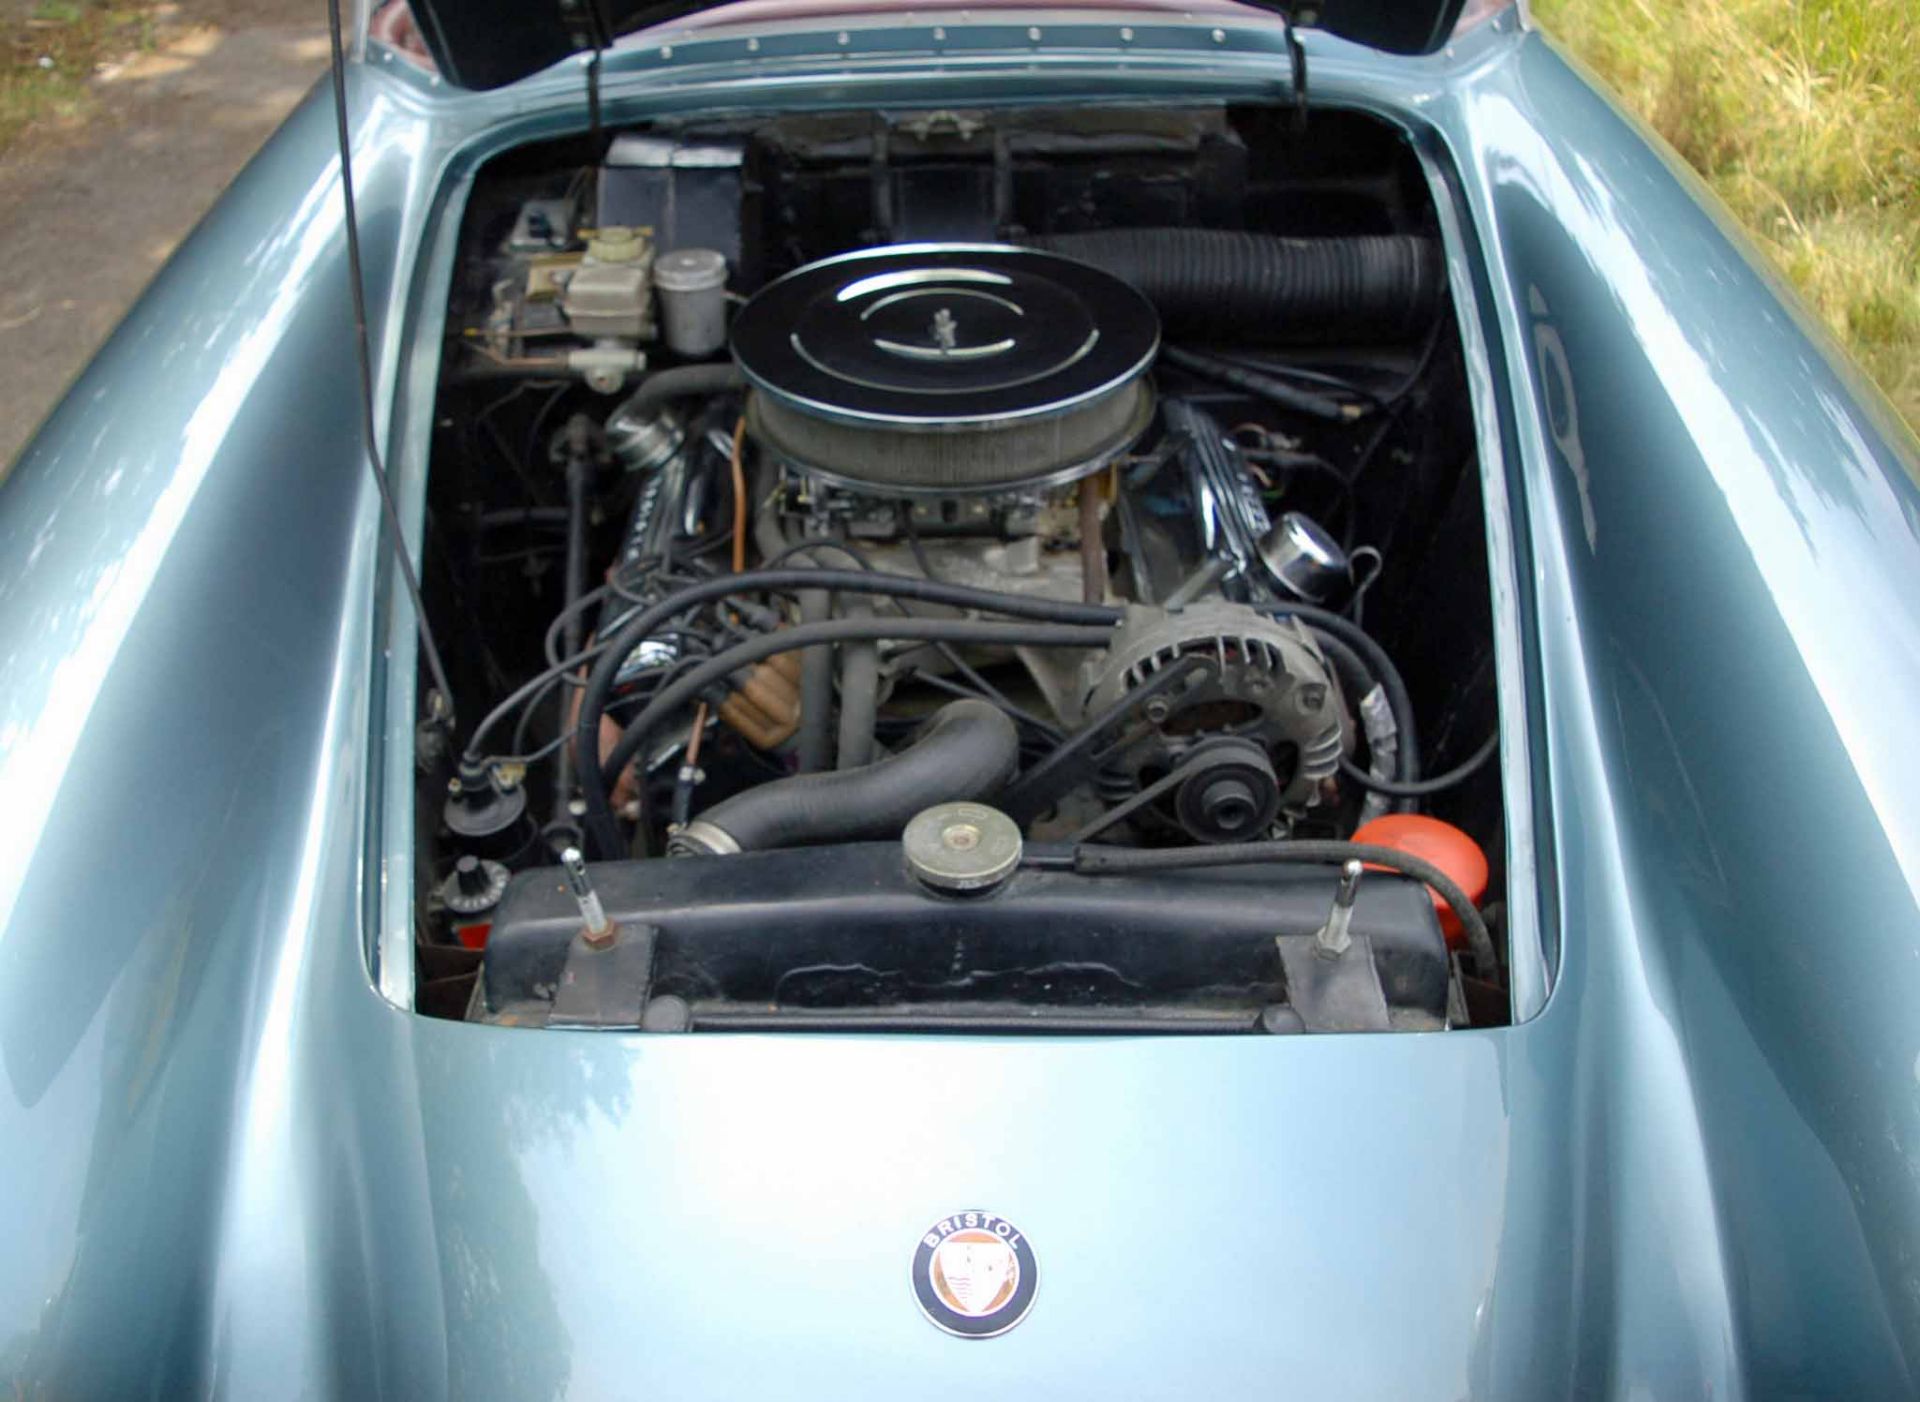 The 1964 Bristol 409 Bullet Speedster. The original Bullet, this car started life as a Bristol 409 - Image 12 of 17